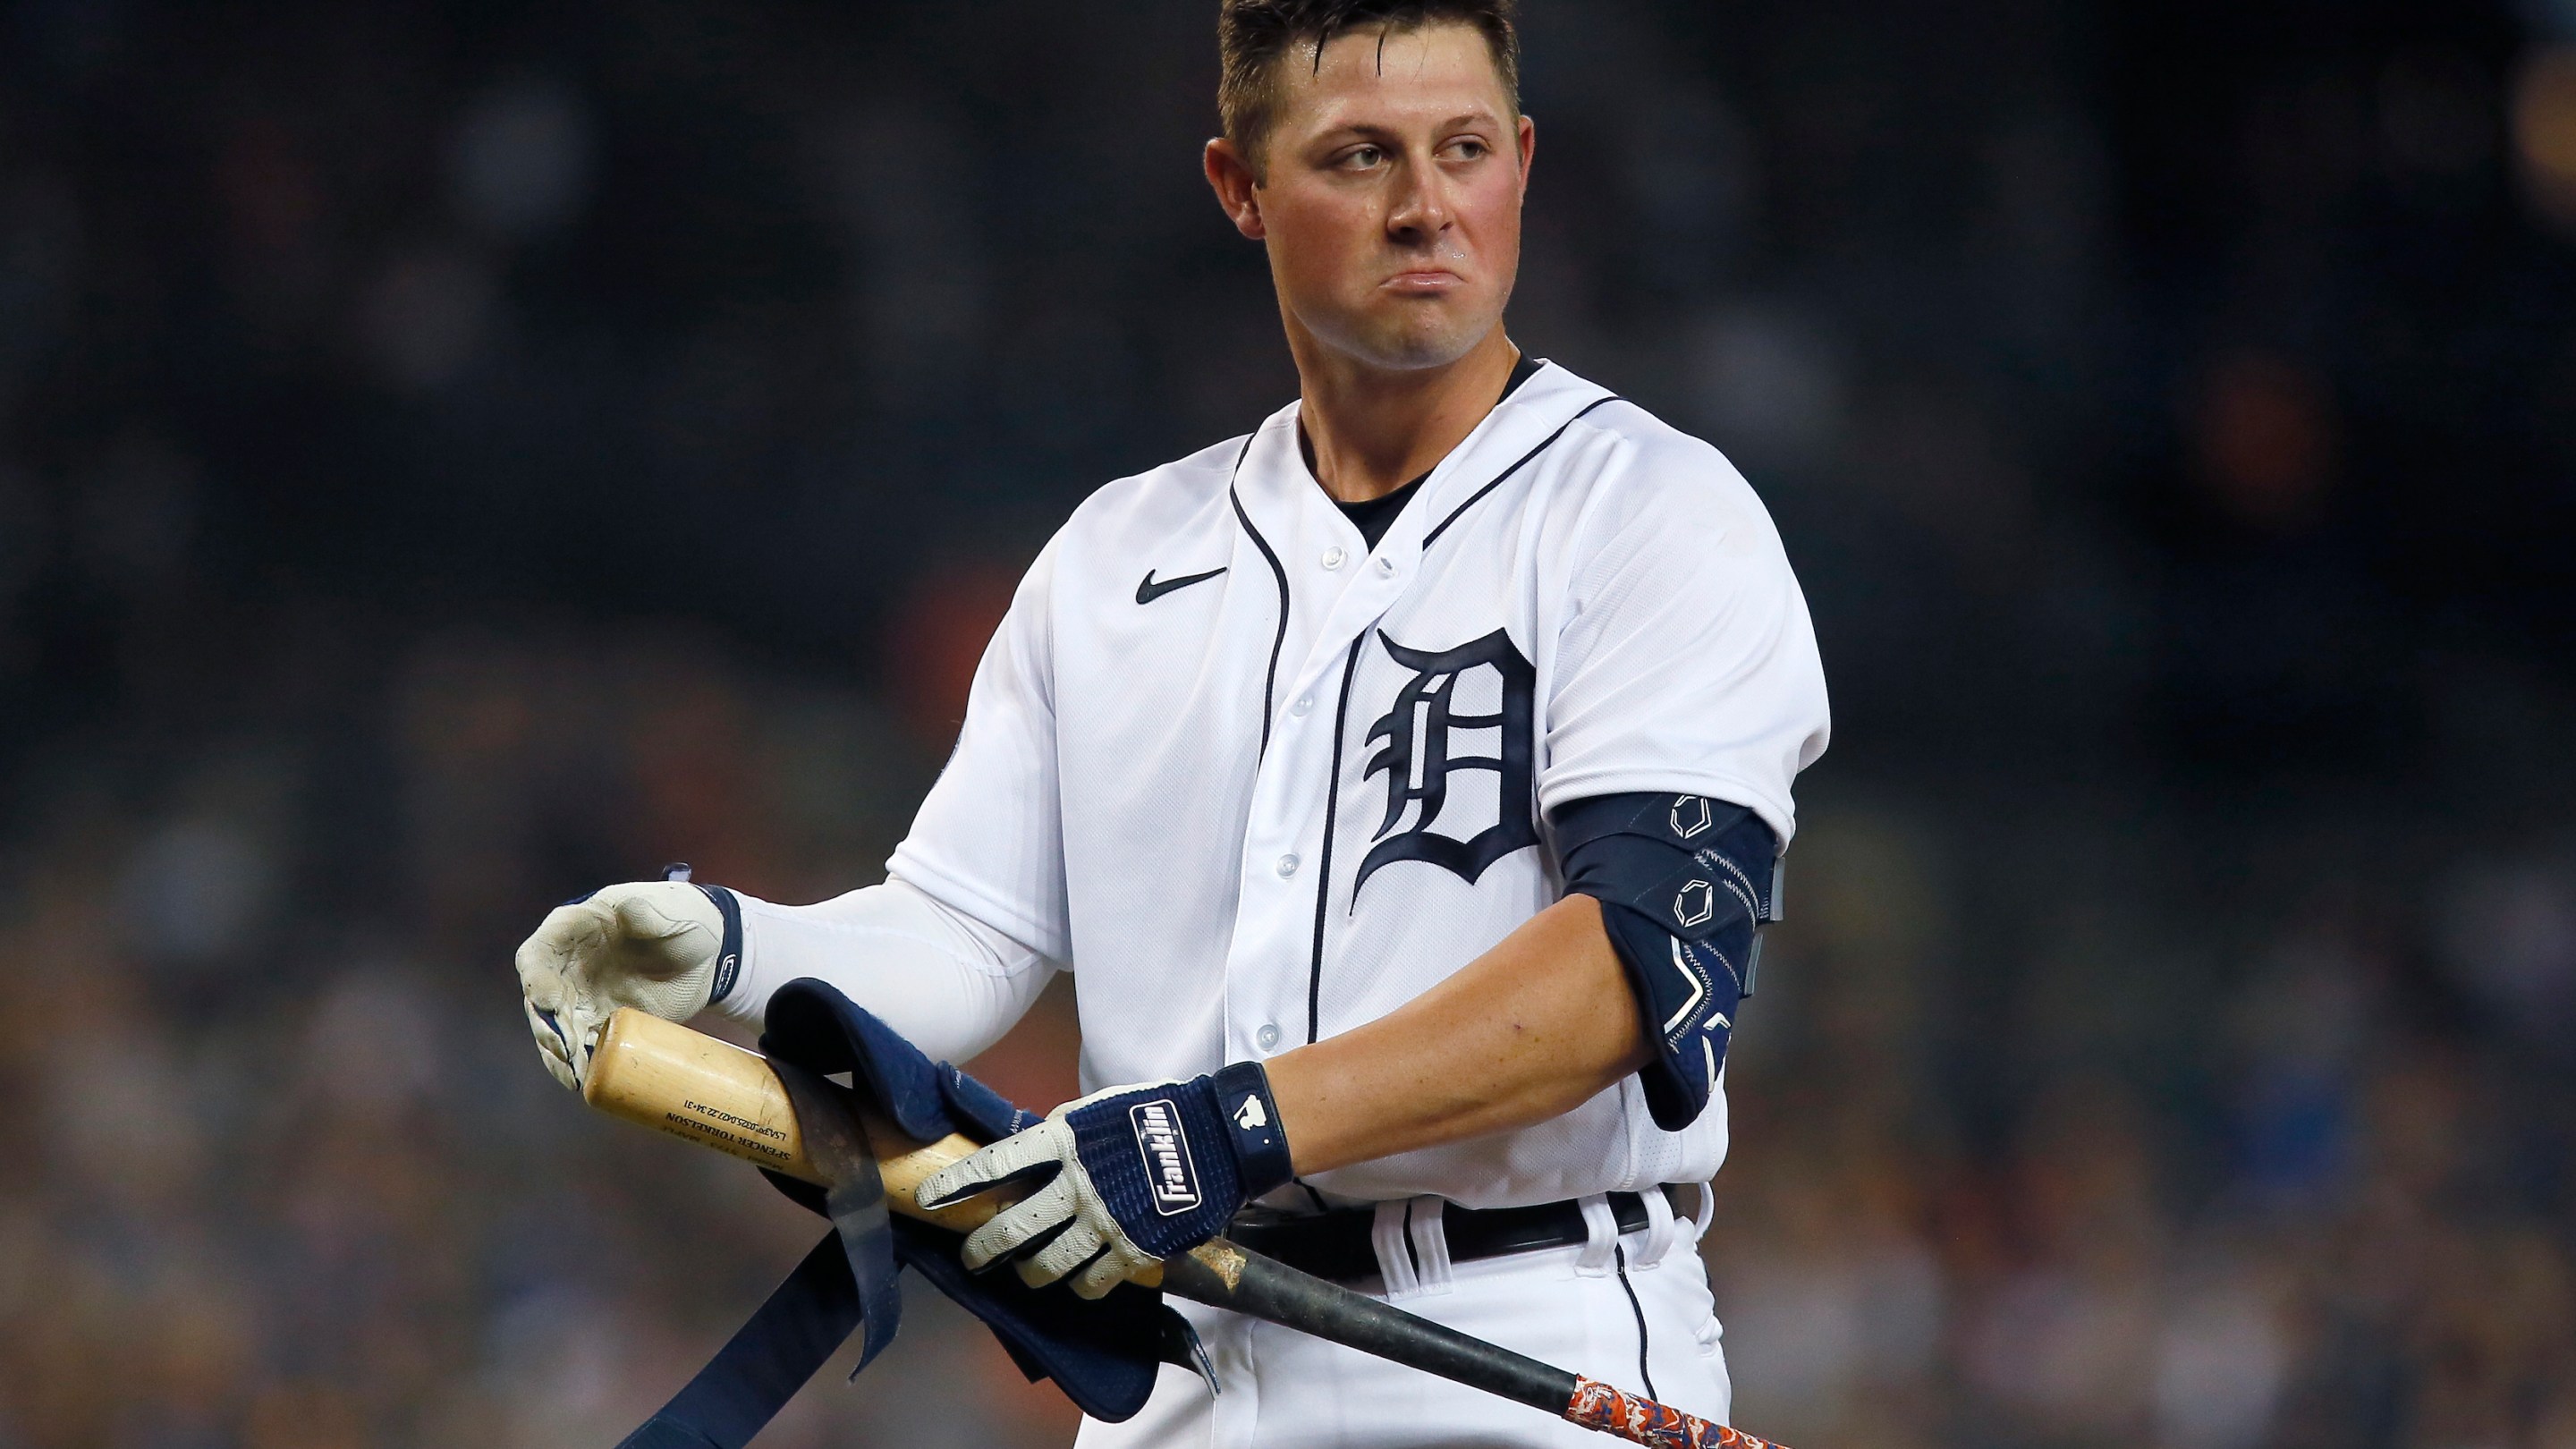 Detroit Tigers first baseman Spencer Torkelson looking very sad after making an out against the Royals in July of 2022.